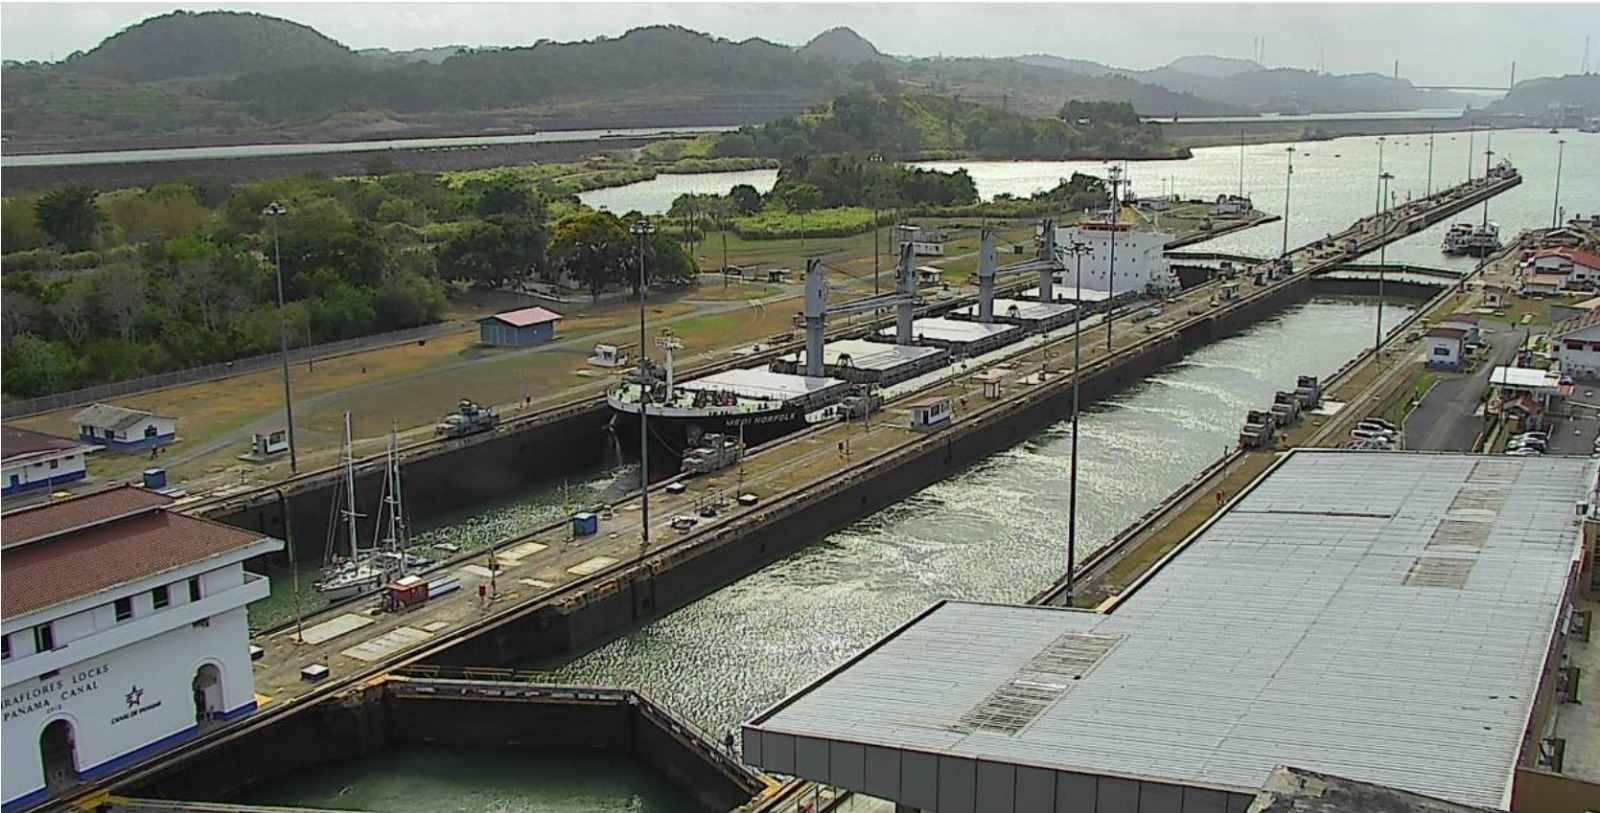 The Panama canal images/2023/can/mia7.jpg